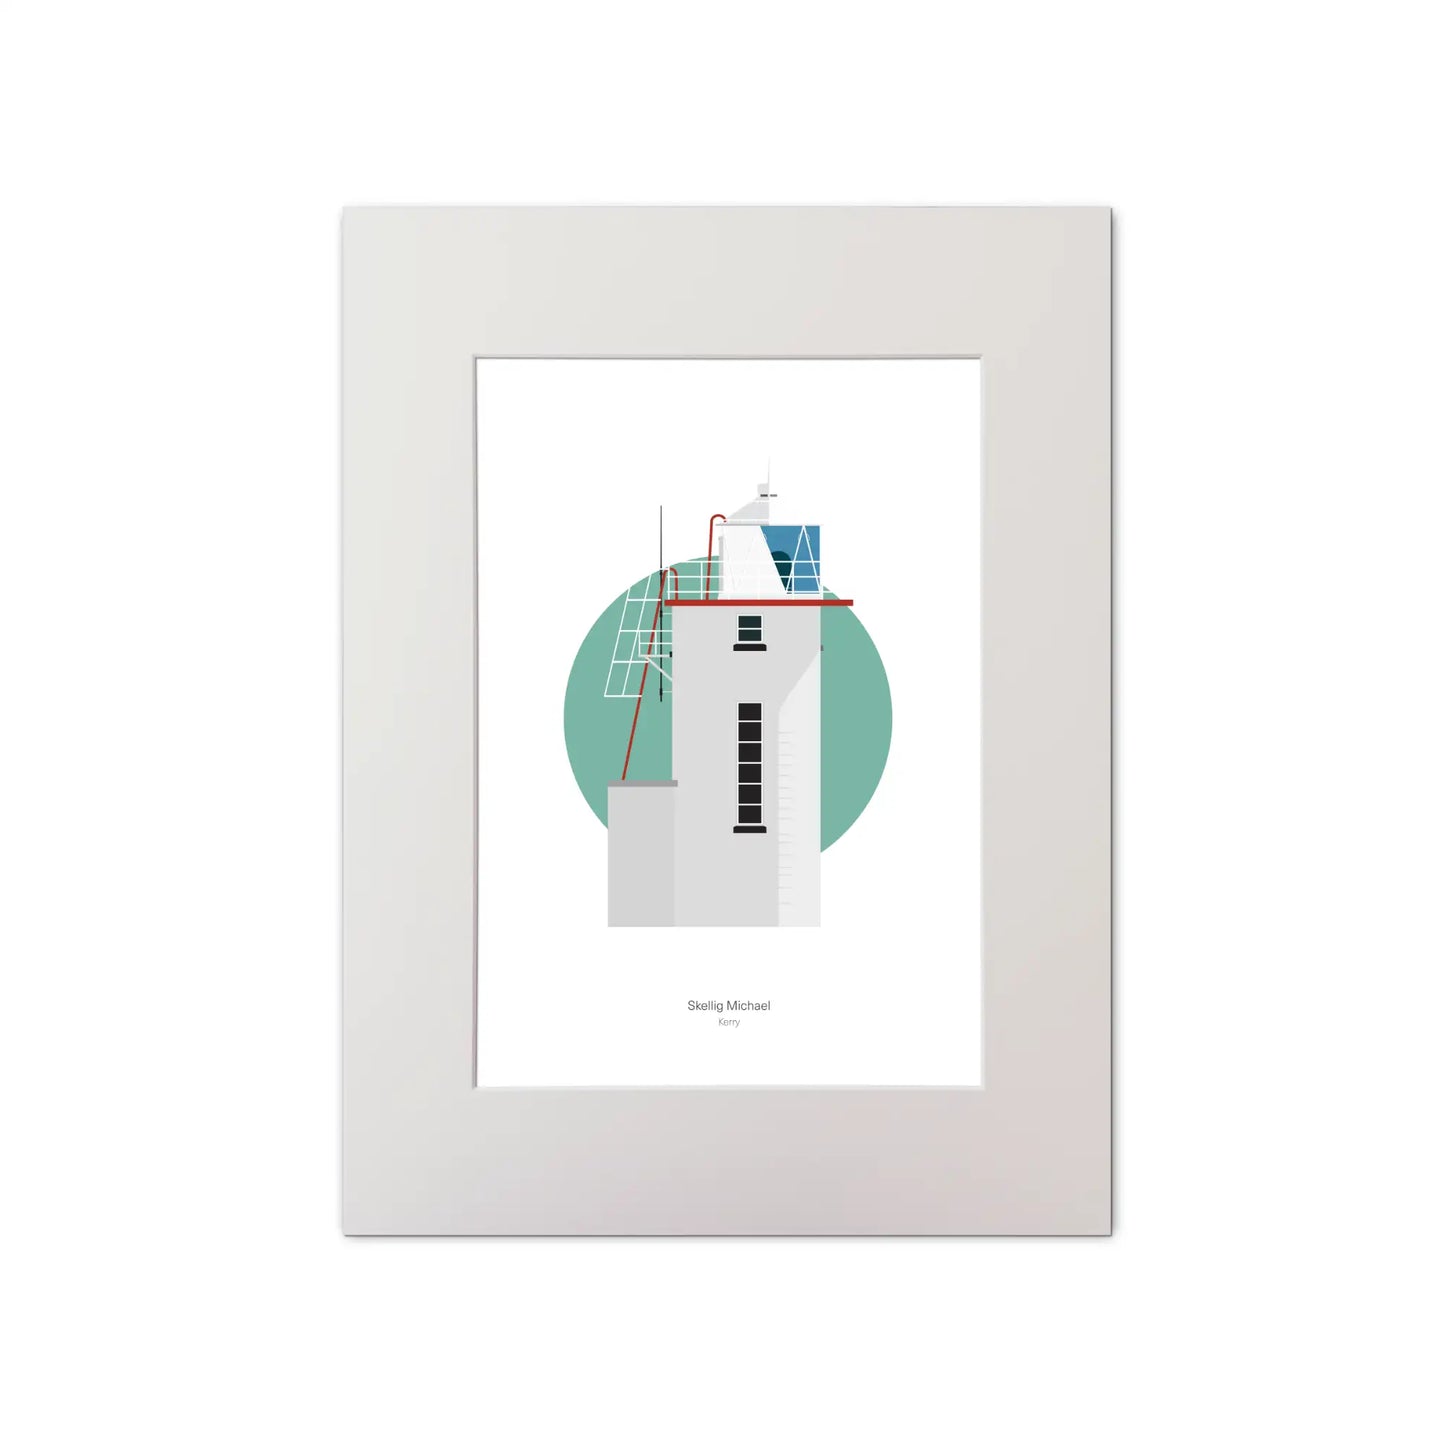 Illustration of Skelligs lighthouse on a white background inside light blue square, mounted and measuring 30x40cm.